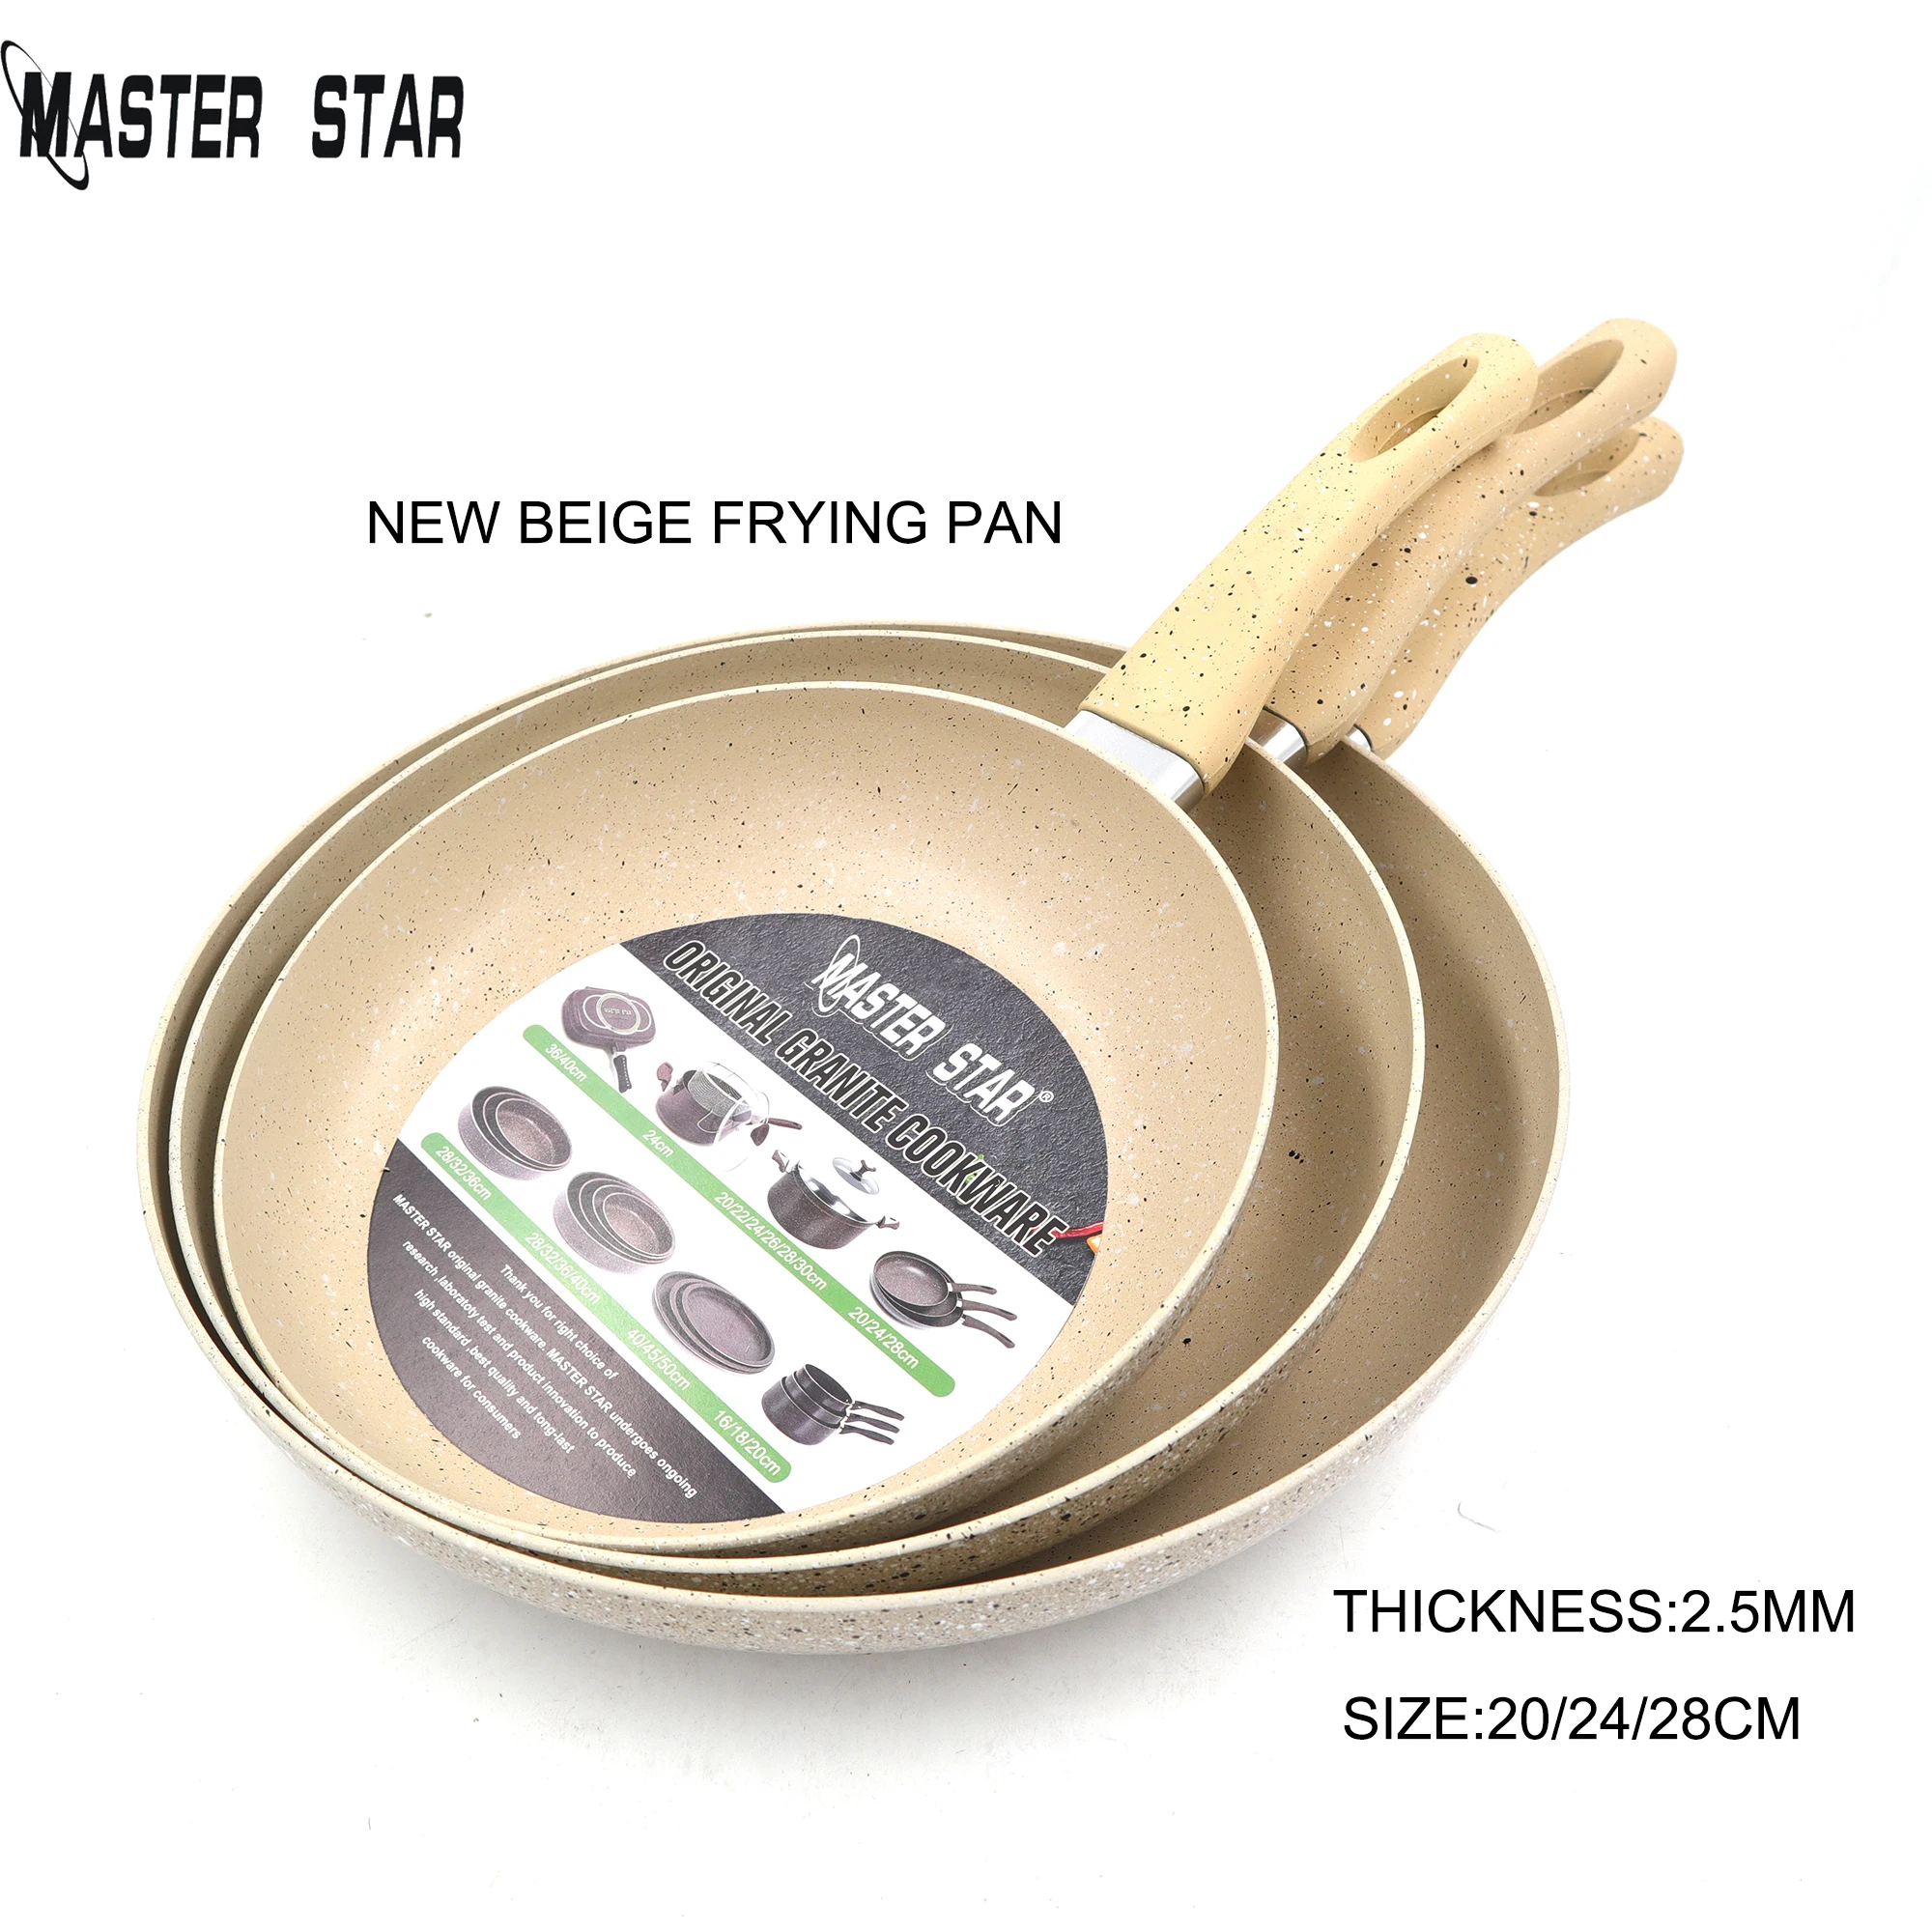 20cm Non Stick Frying Pan Tefon Quality Tested Non Stick Coating 